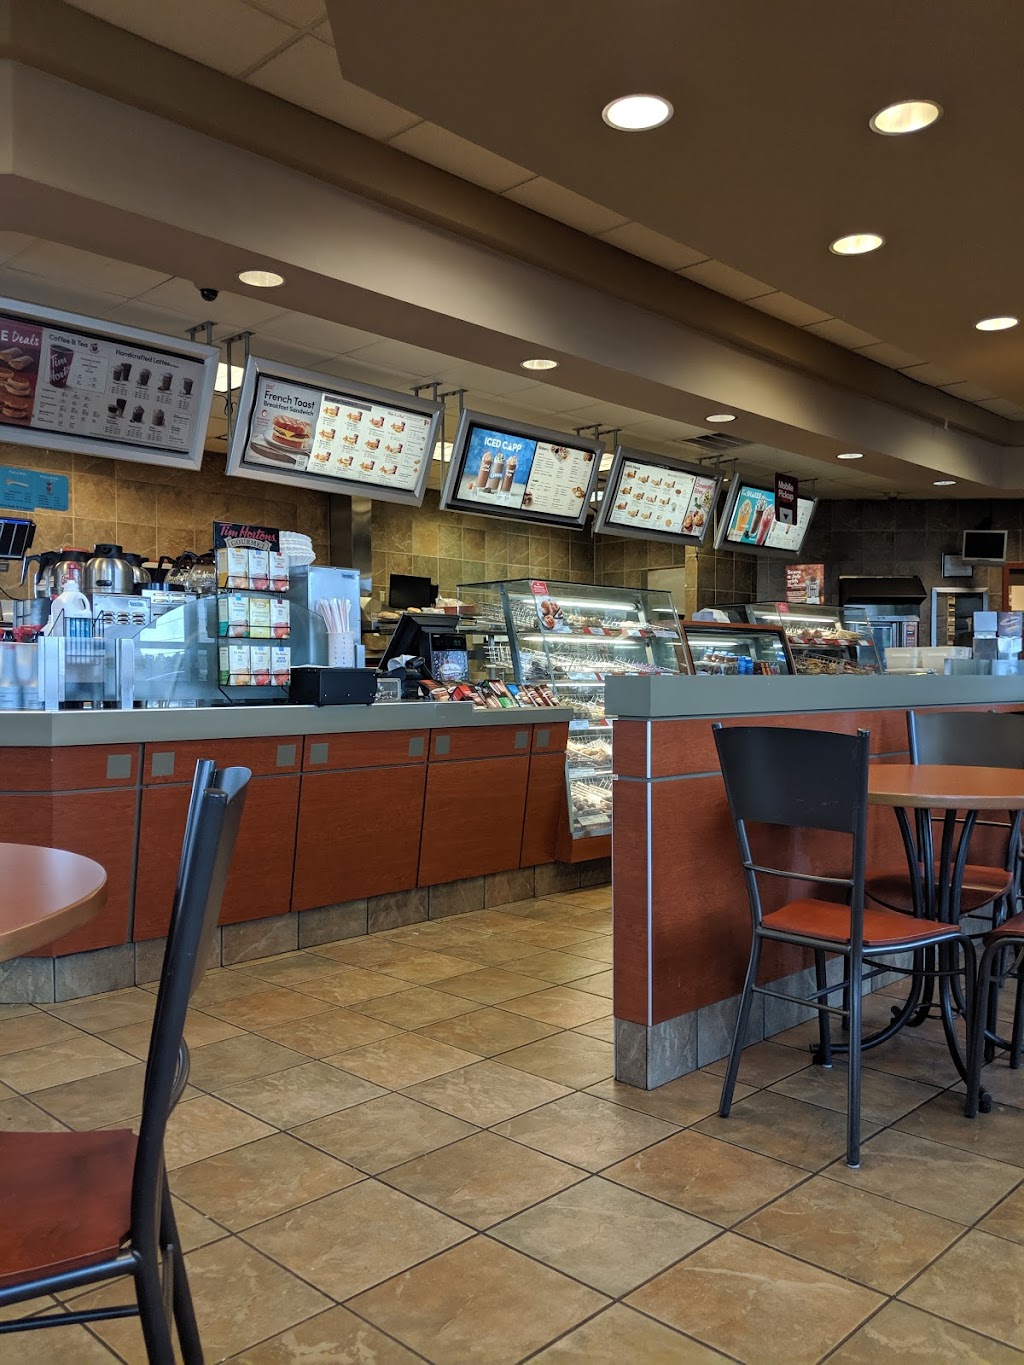 Tim Hortons | 131 Chestnut St, Coshocton, OH 43812 | Phone: (740) 295-0529